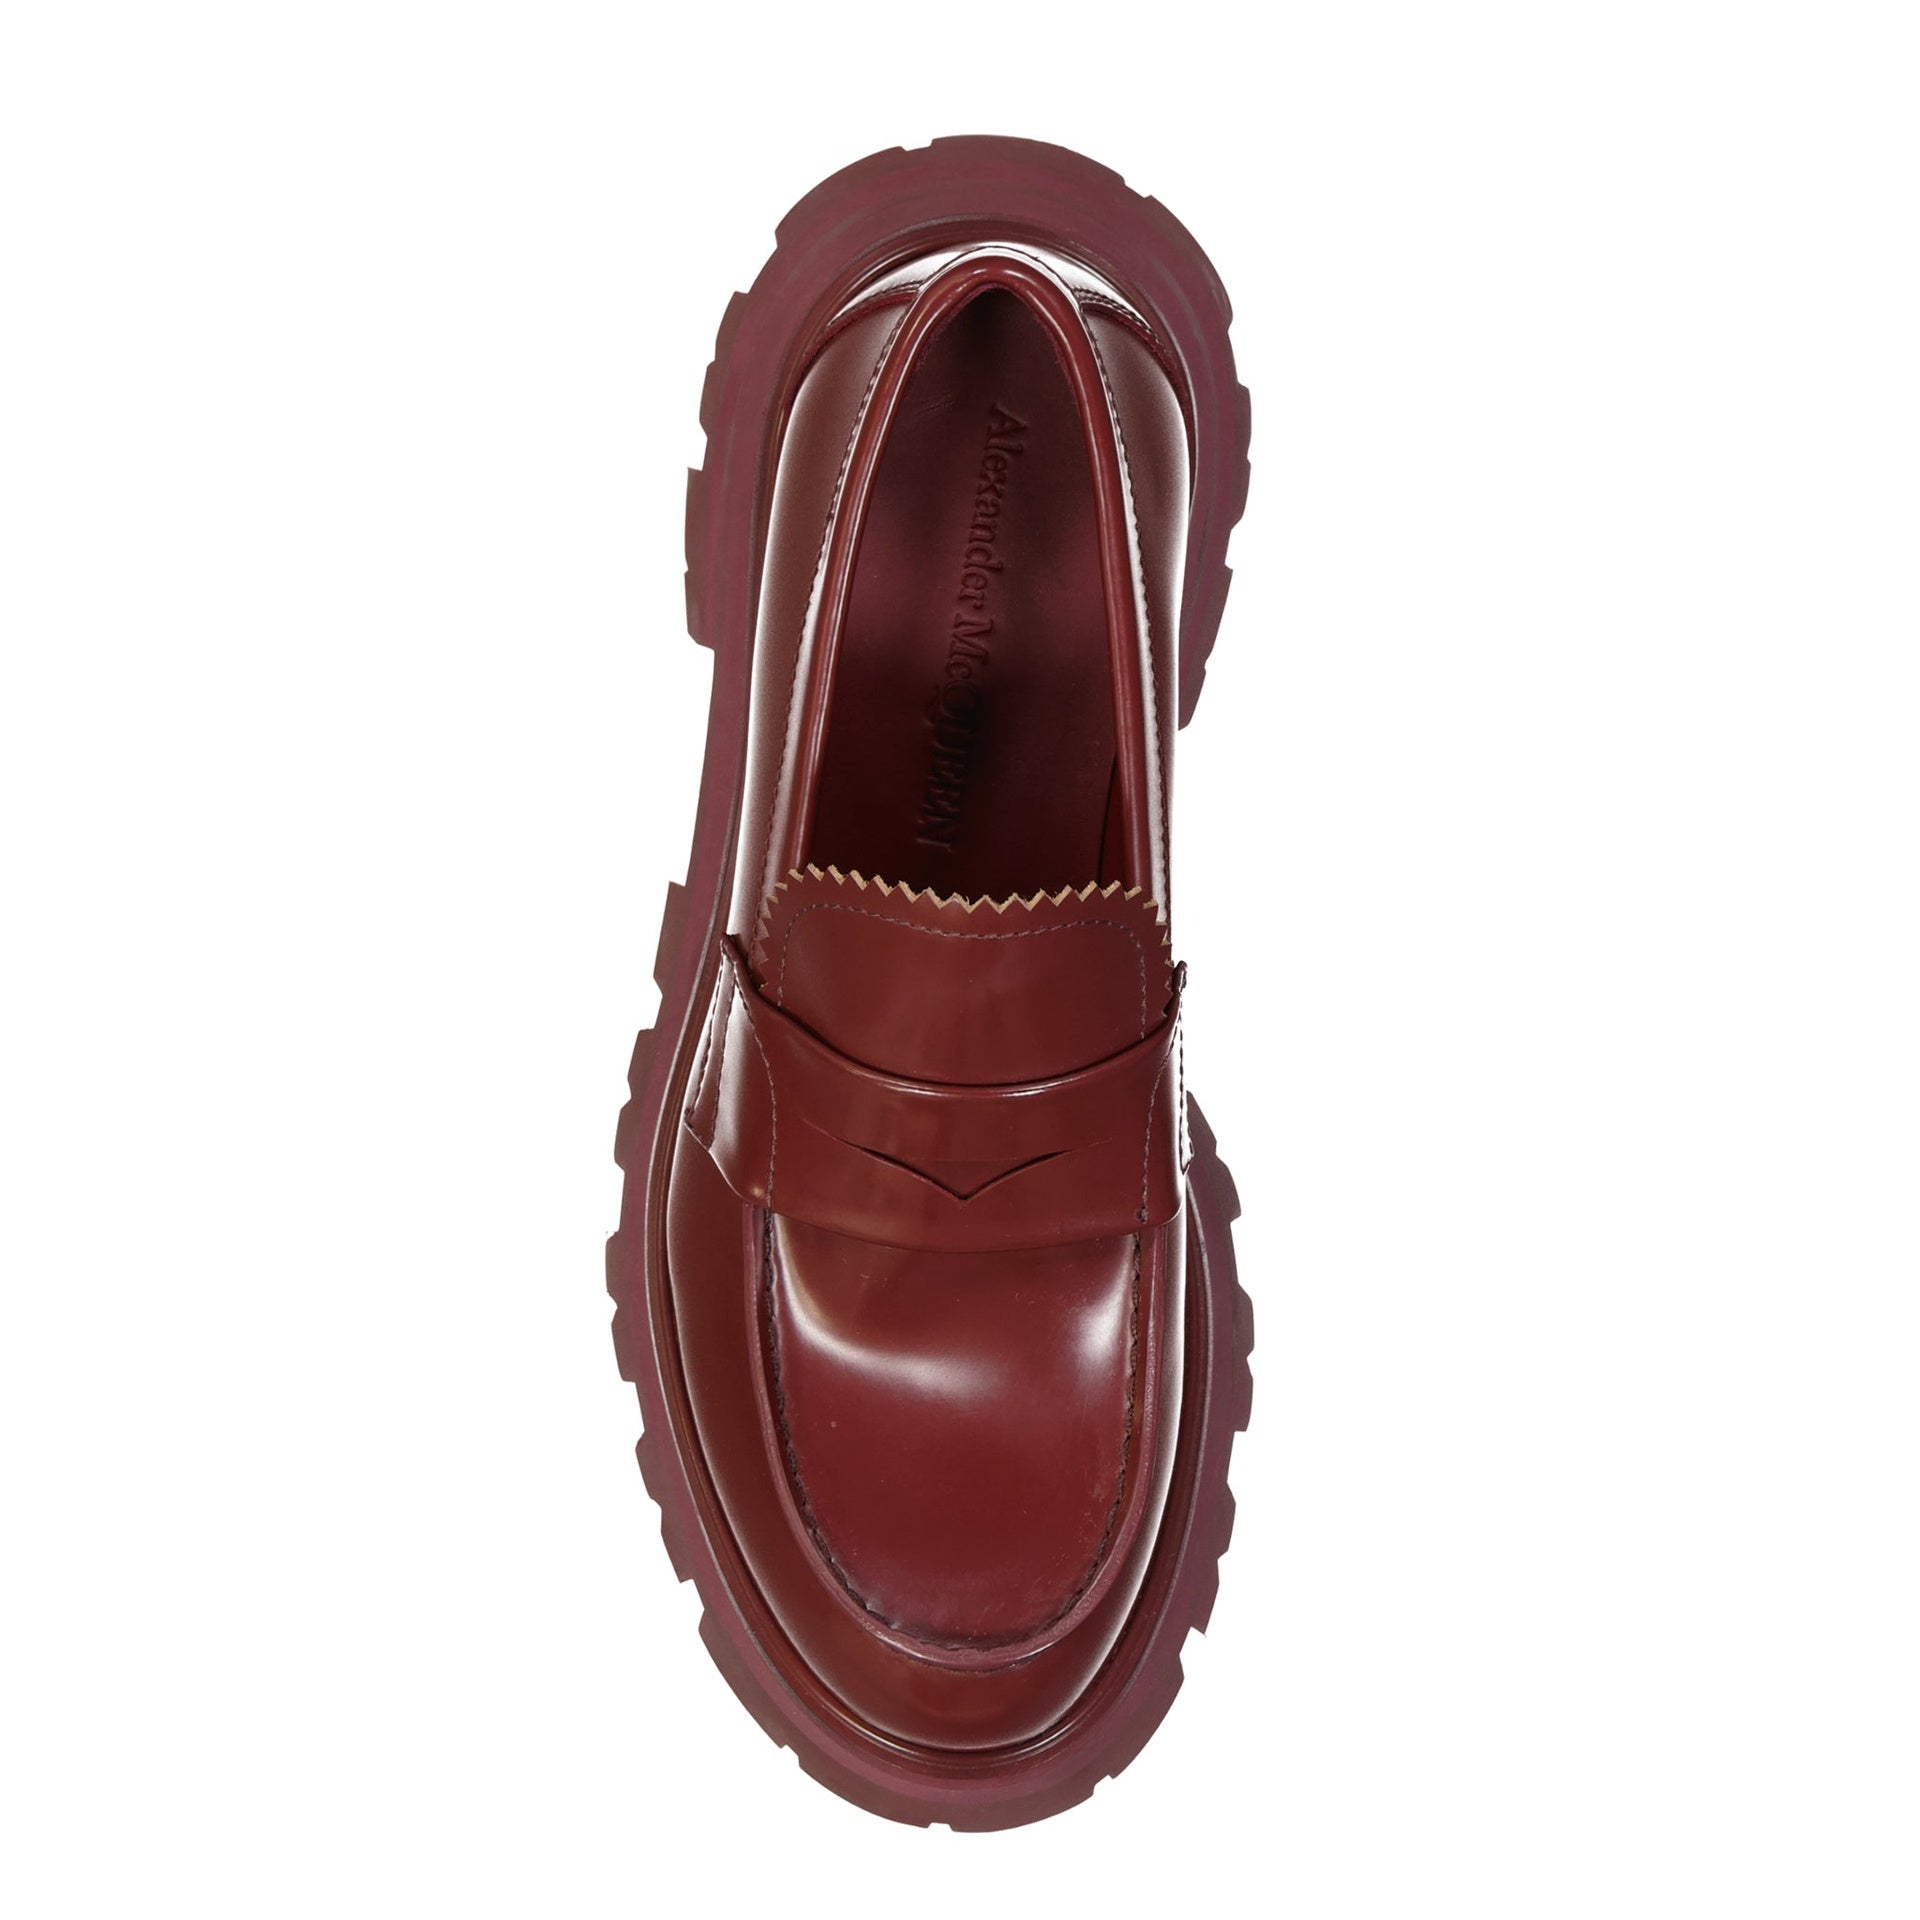 ALEXANDER-MCQUEEN-OUTLET-SALE-Alexander-Mcqueen-Leather-Loafers-Flache-Schuhe-RED-39-ARCHIVE-COLLECTION-4.jpg